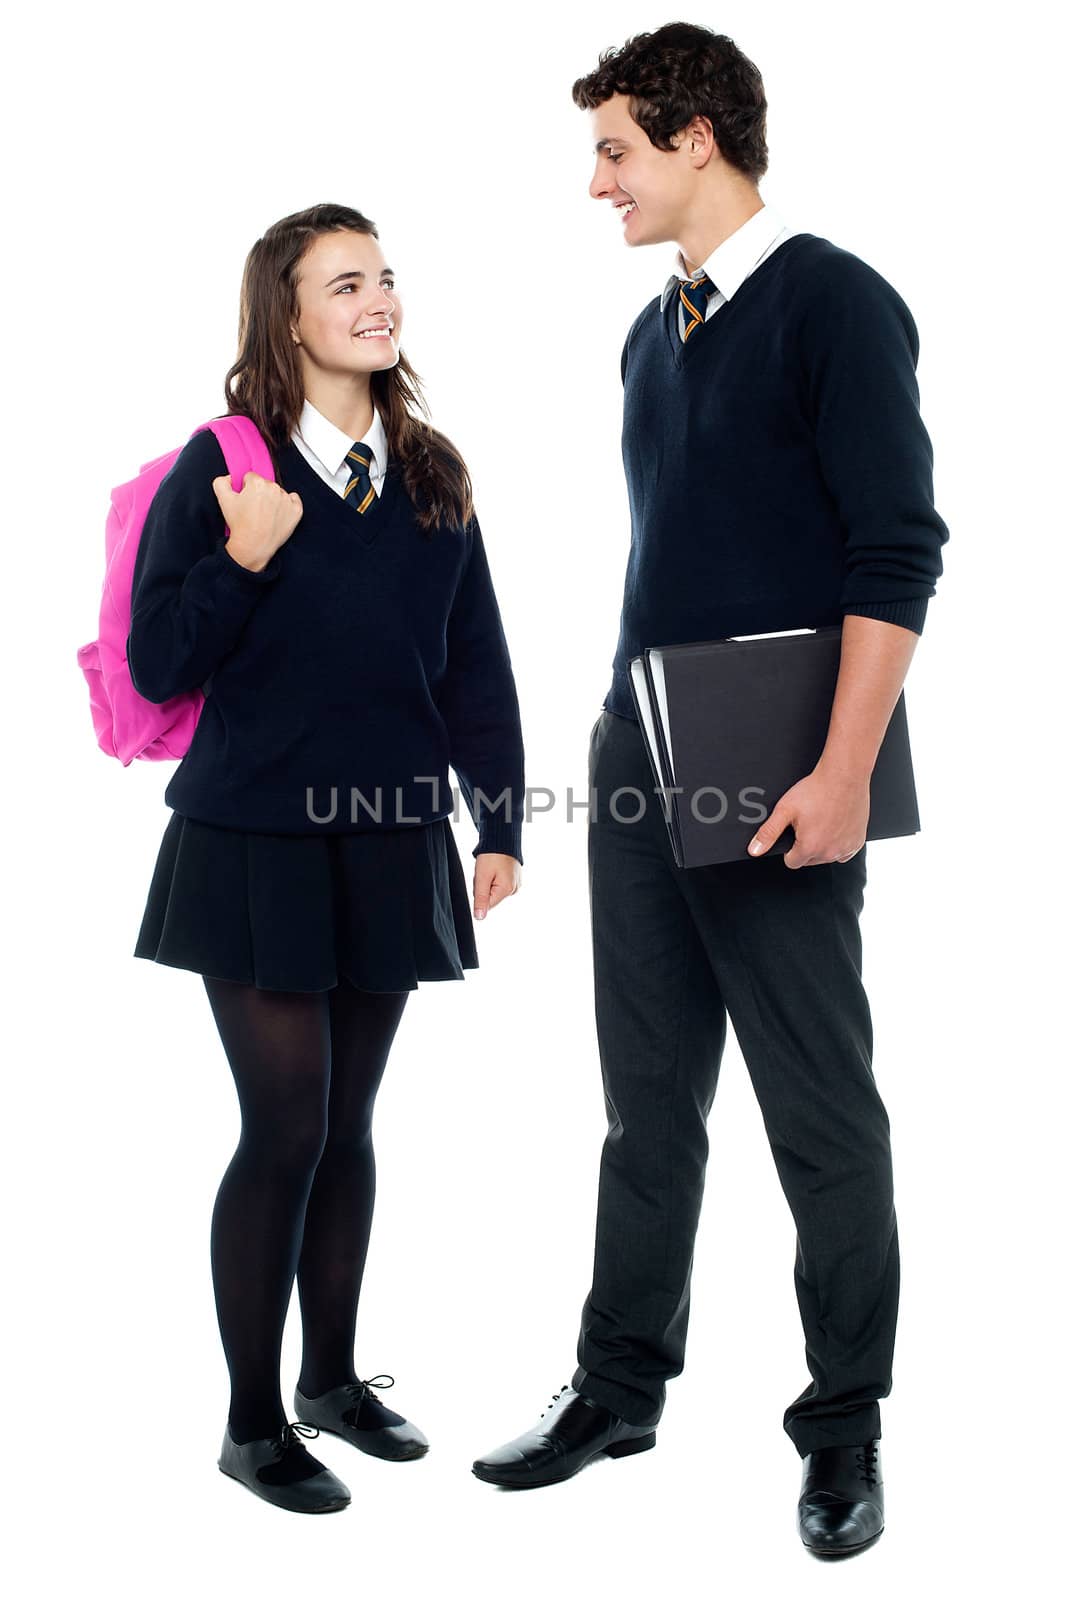 Casual shot of students looking at eachother and engaged in a jovial discussion isolated against white background